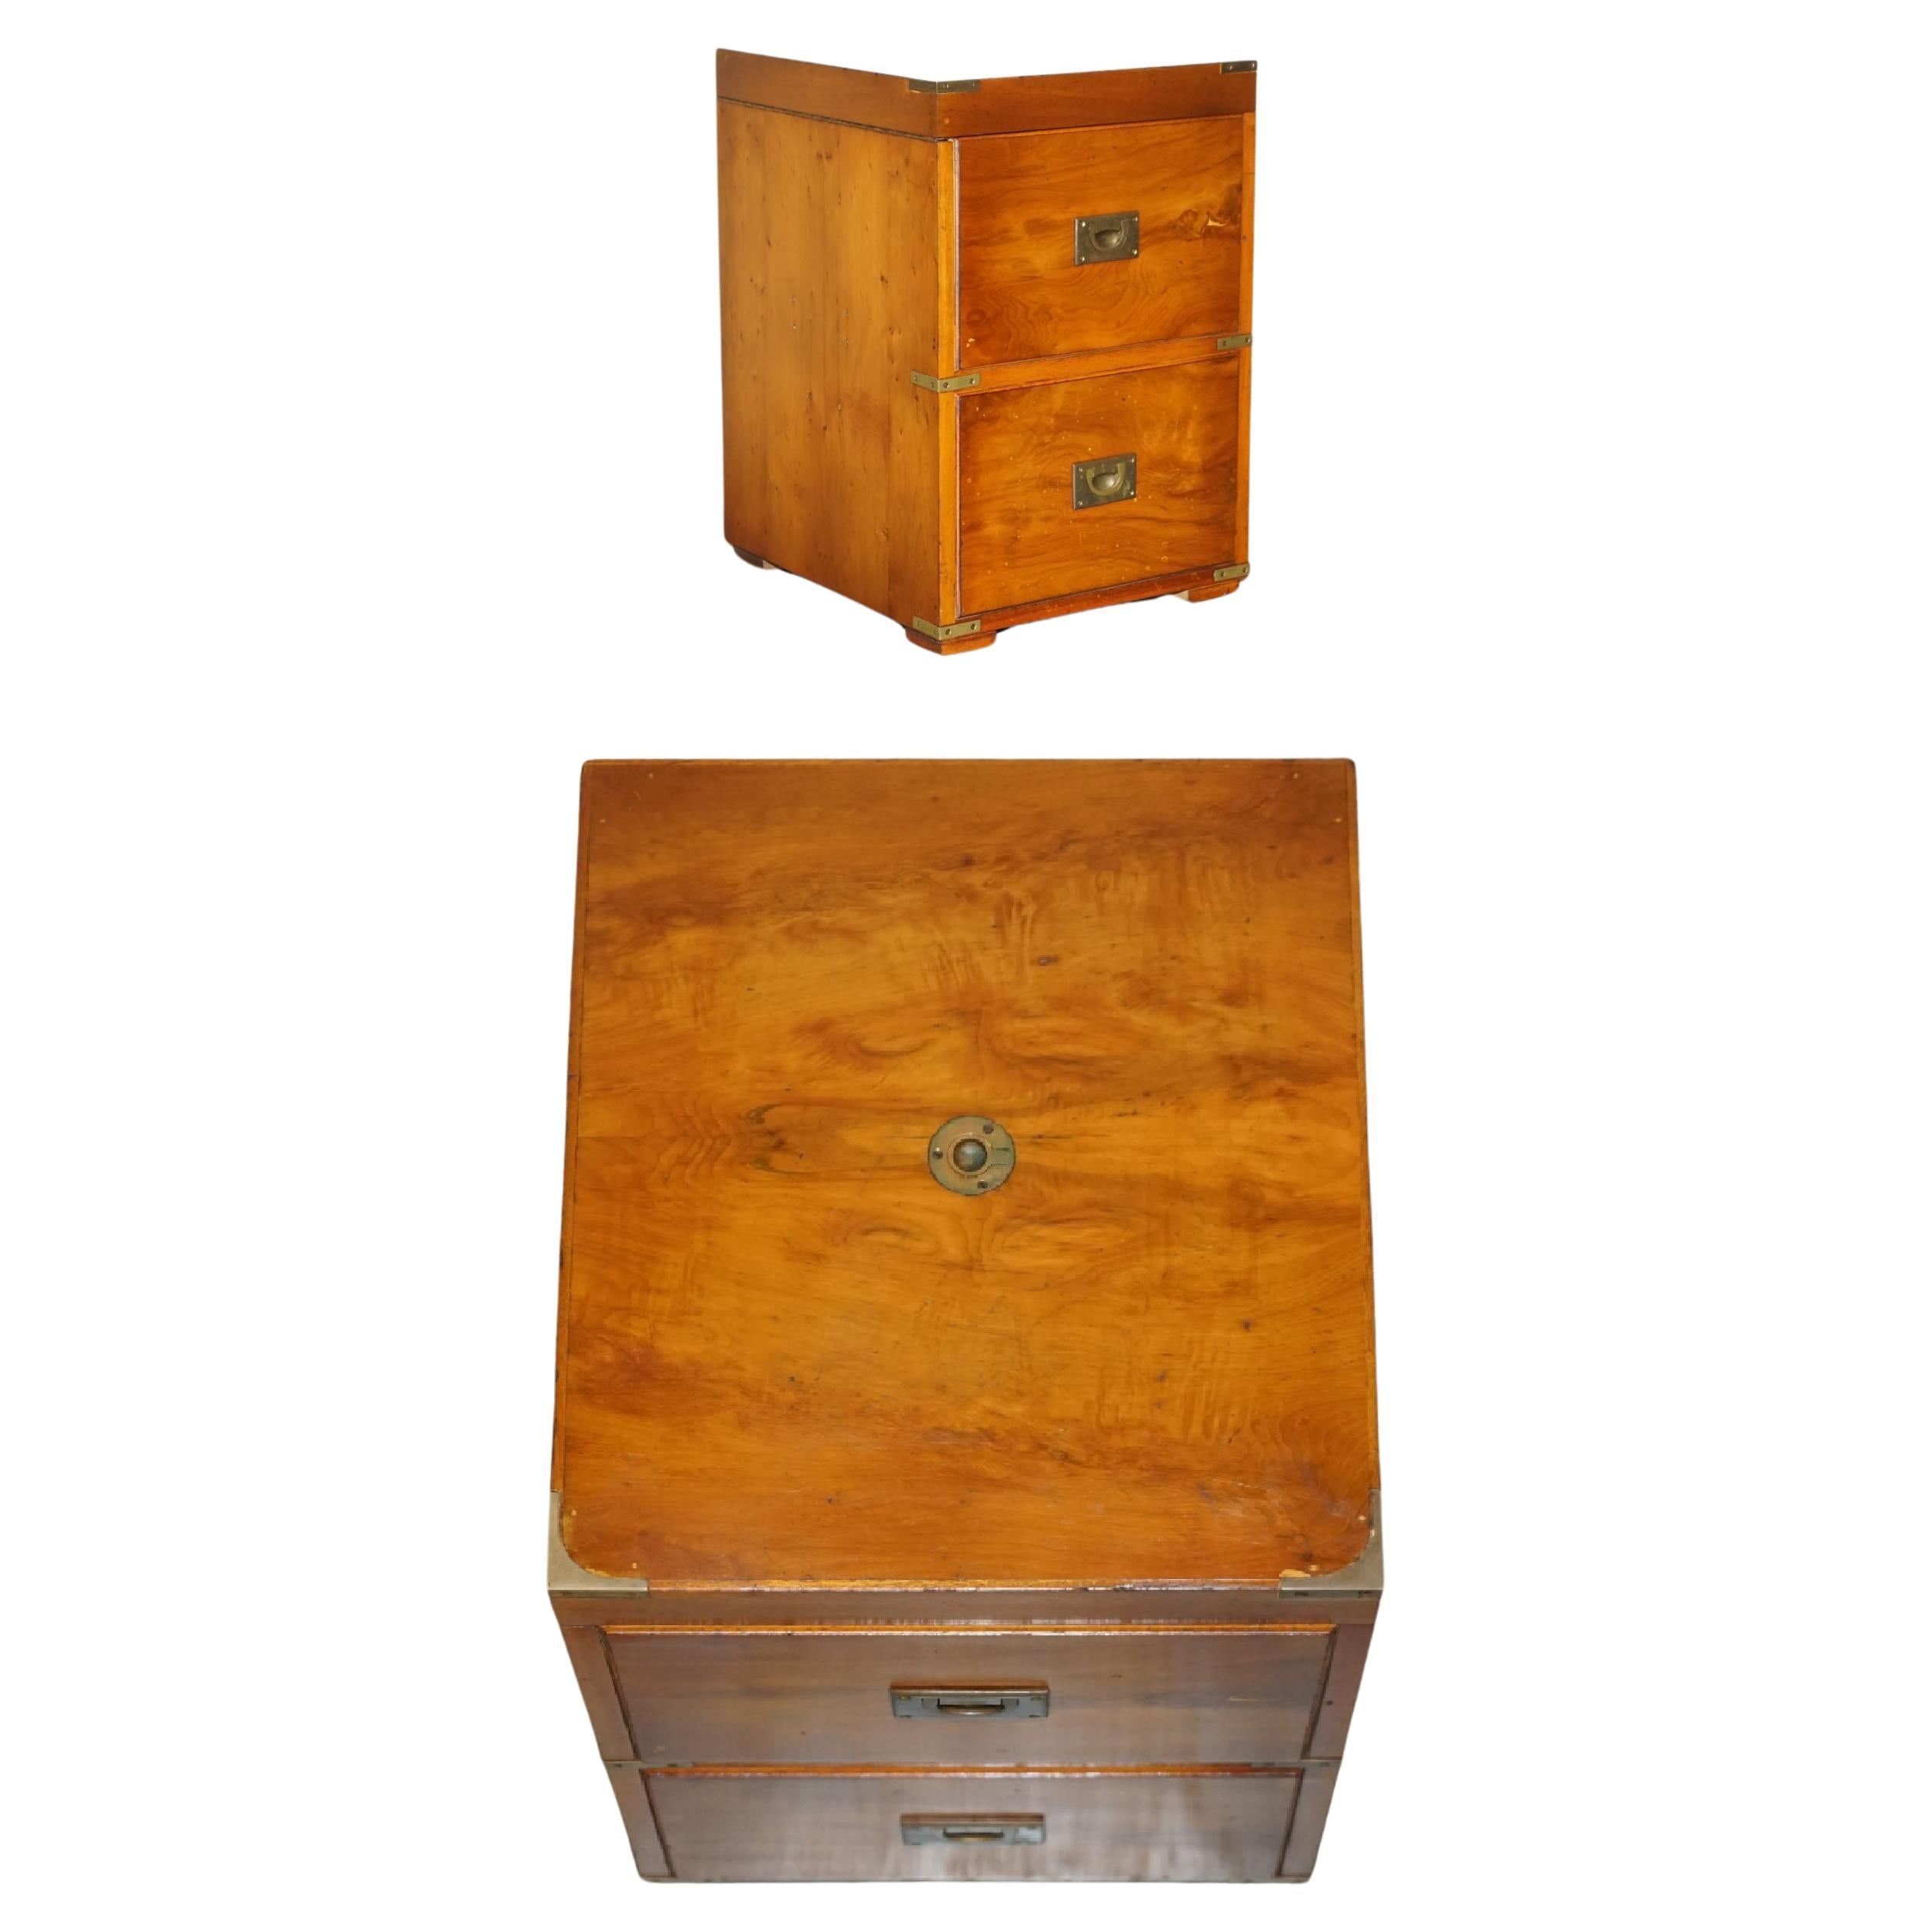 BURR YEW & ELM WOOD CAMPAIGN DRINKS CABINET HIDDEN INSIDE A SIDE TABLE